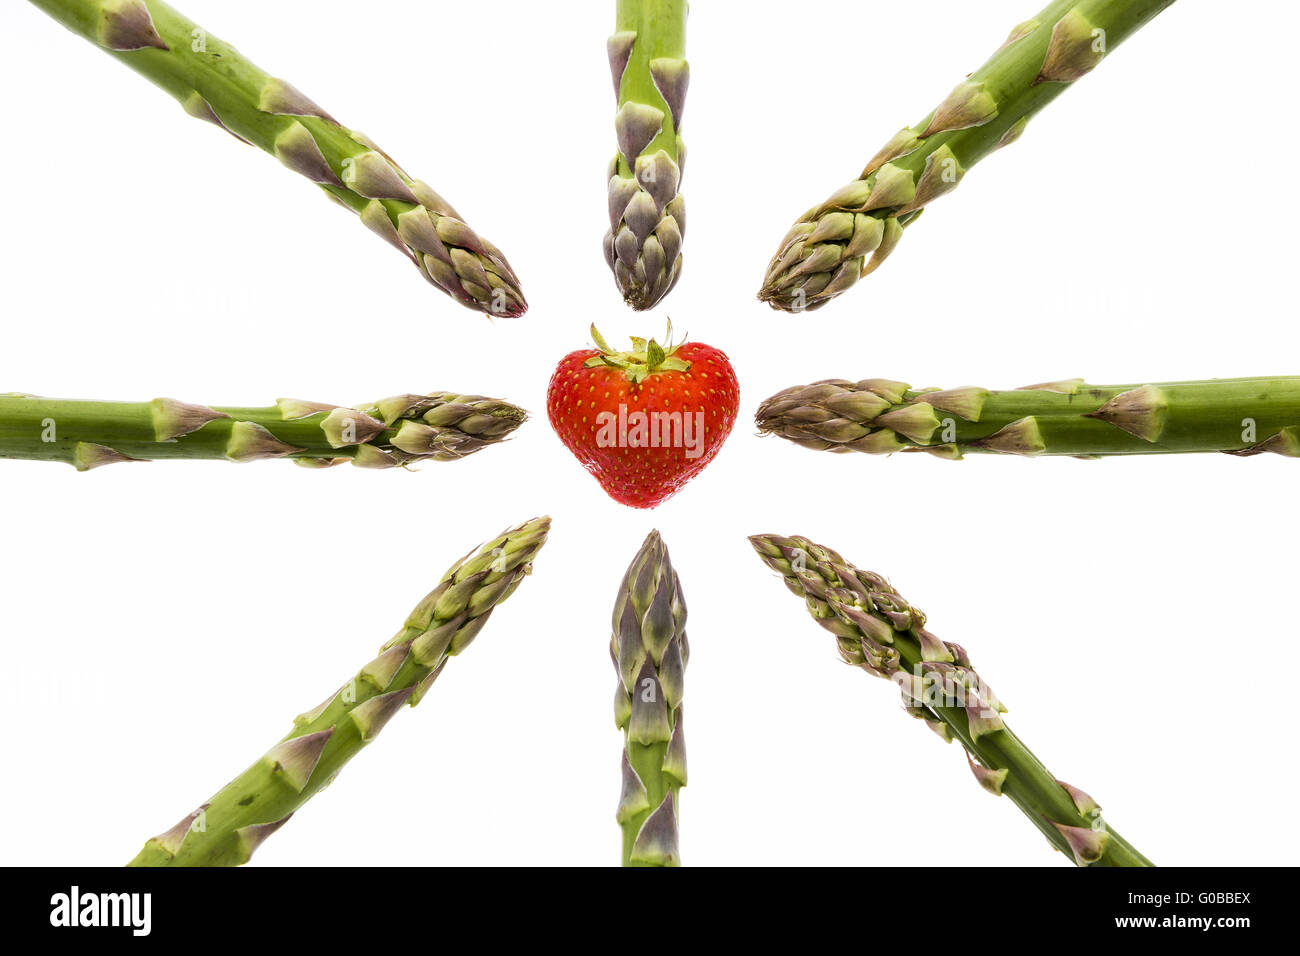 Eight asparagus tips pointing at one strawberry Stock Photo